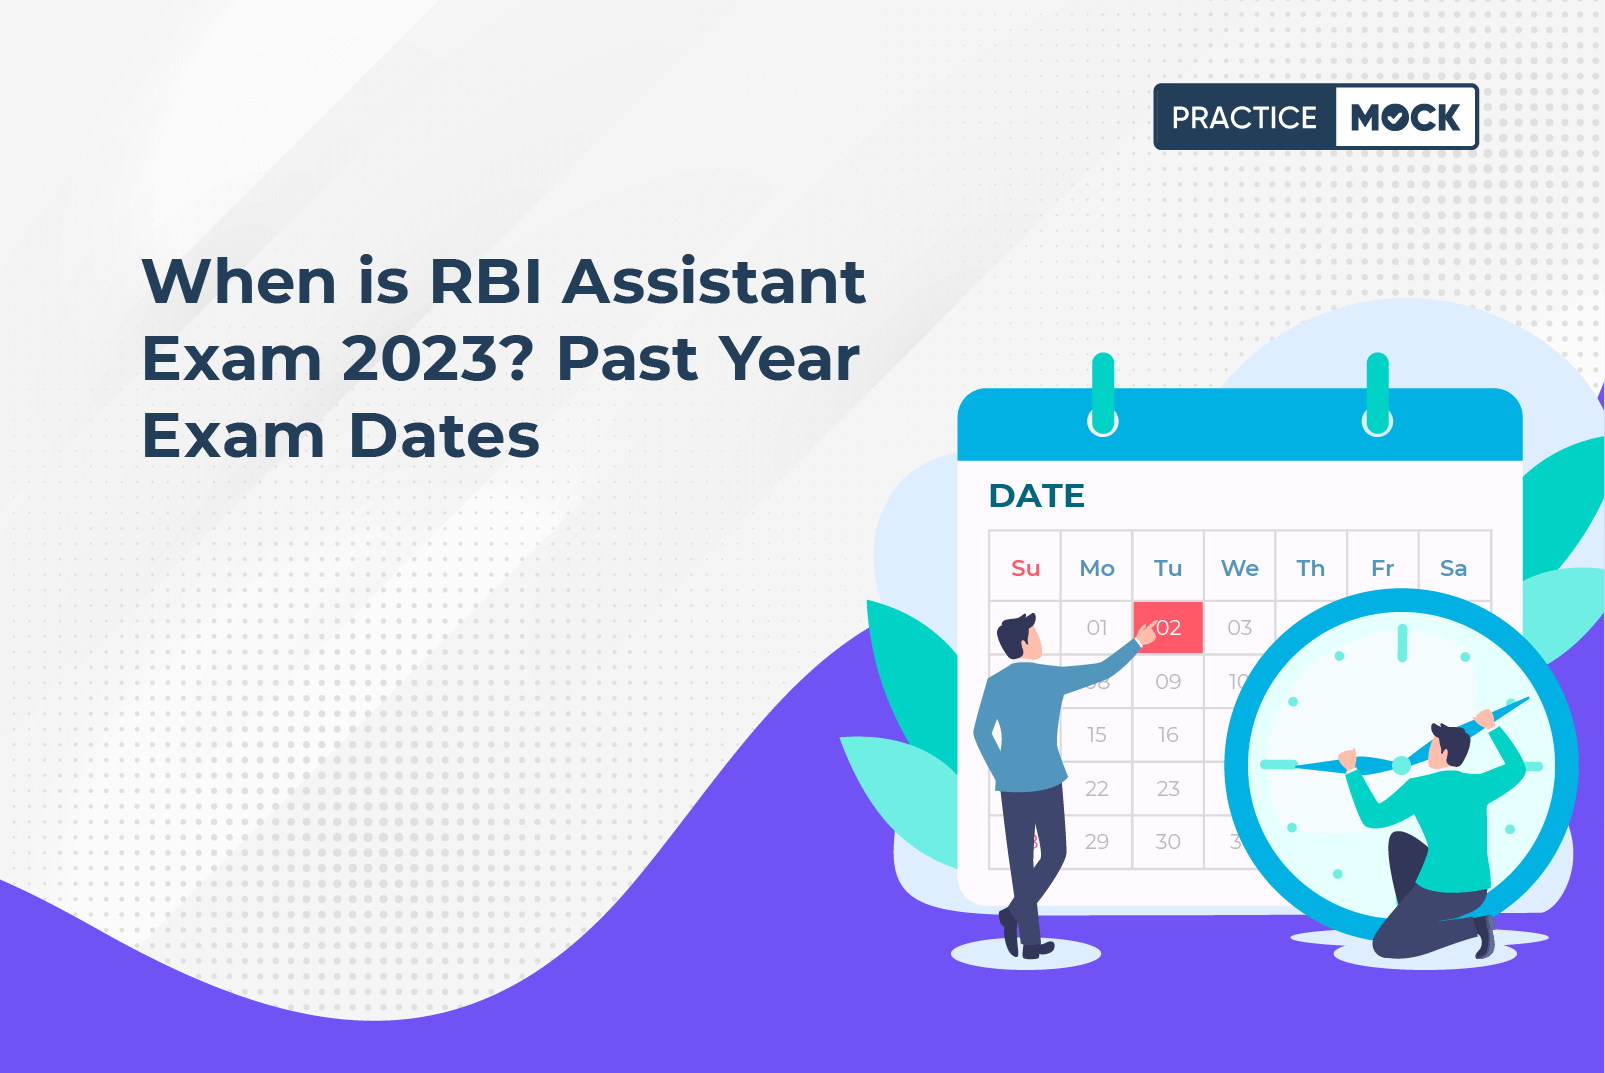 When is RBI Assistant Exam 2023 Past Year Exam Dates